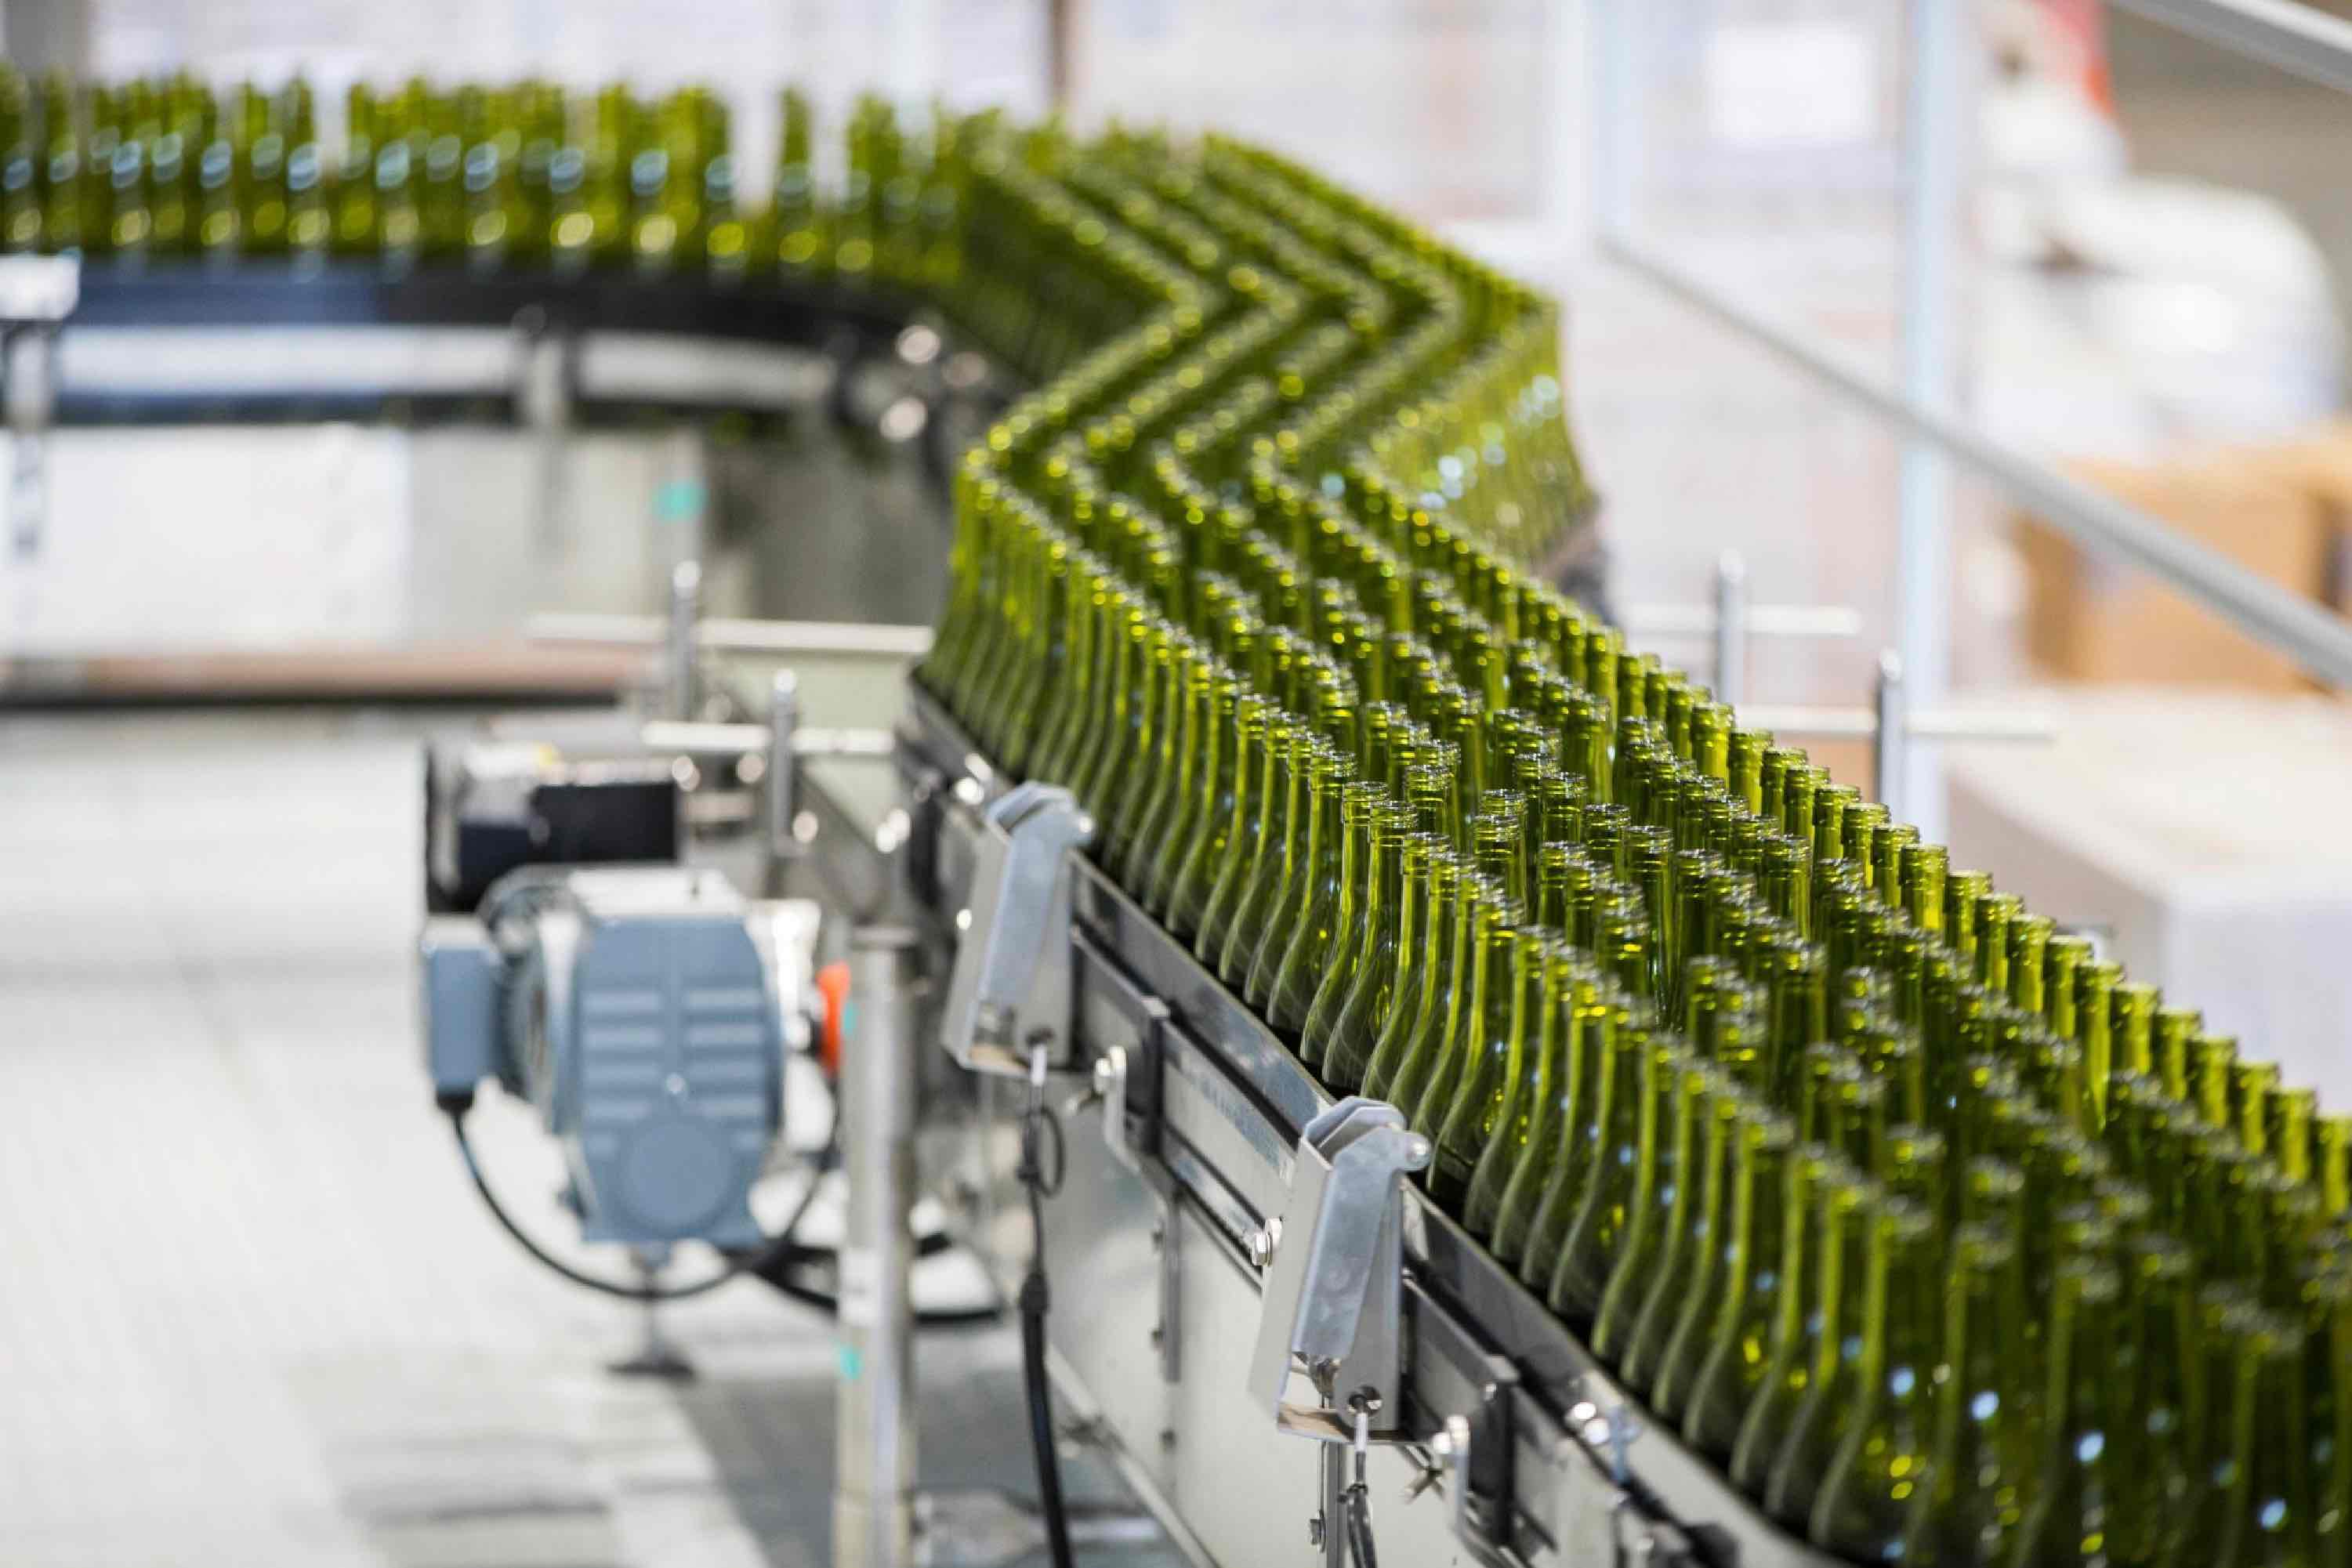 Wine bottles on a getting processed